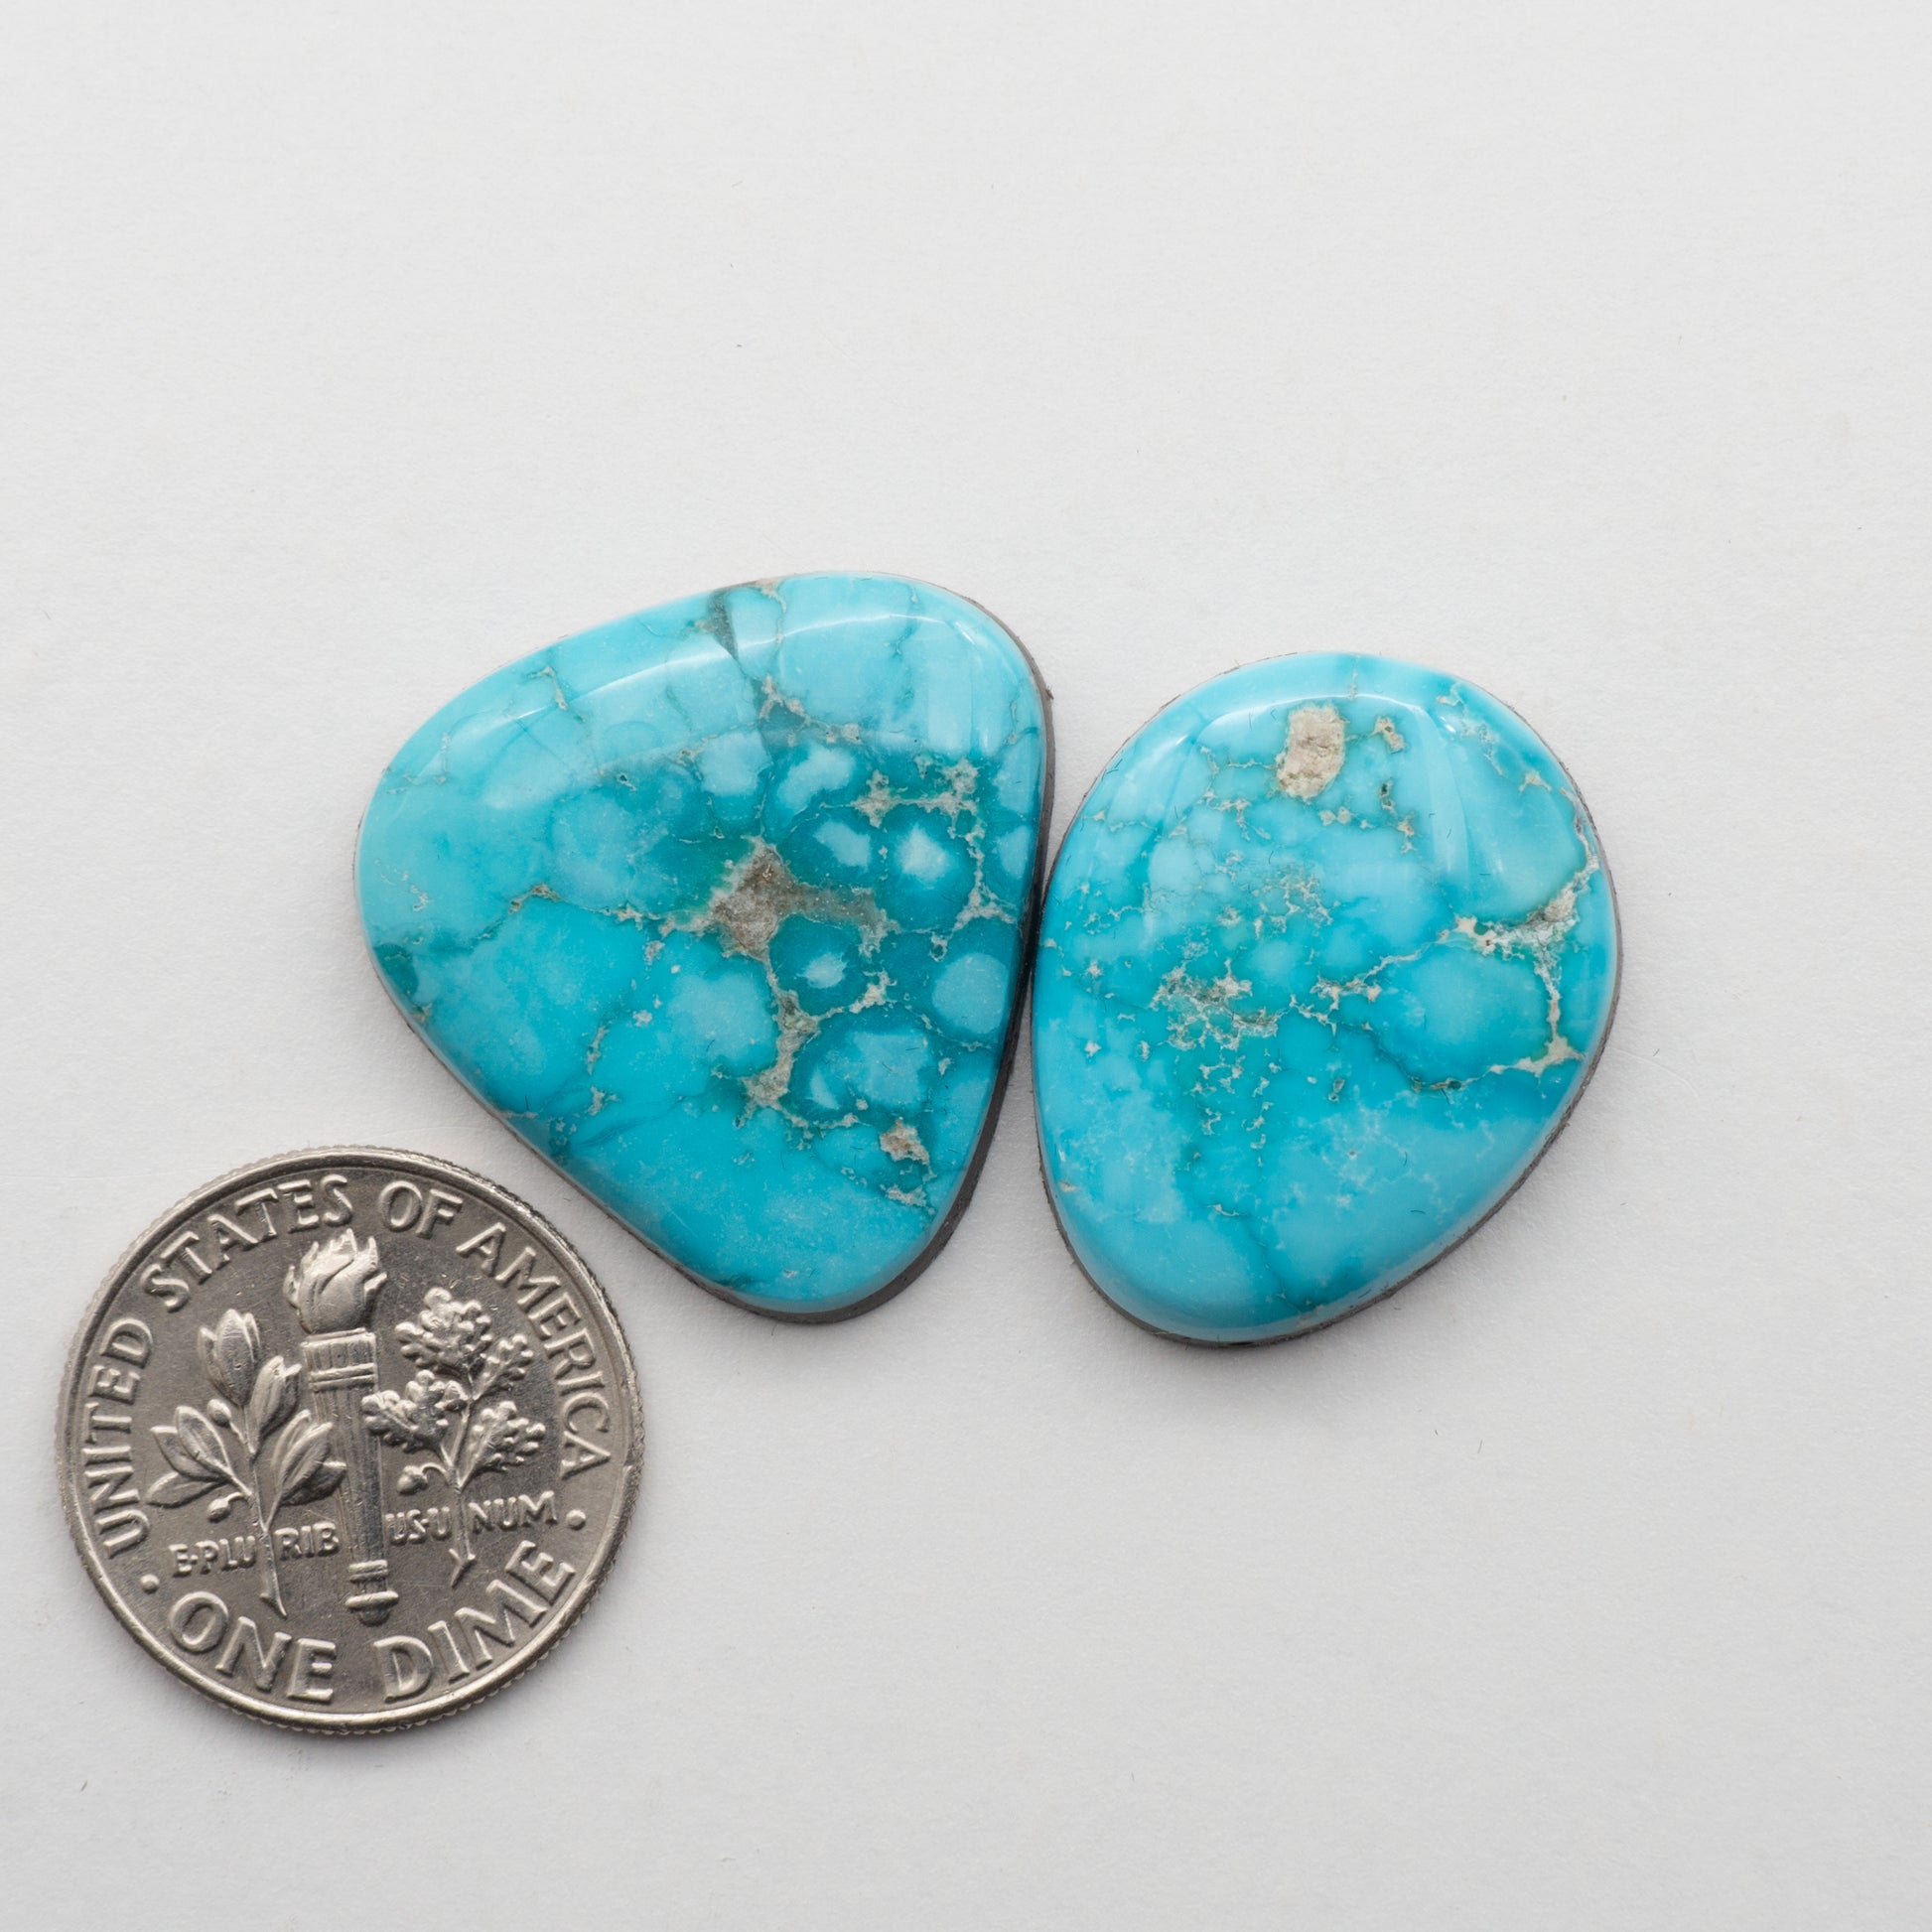 Emerald Valley Turquoise Cabochon Lot